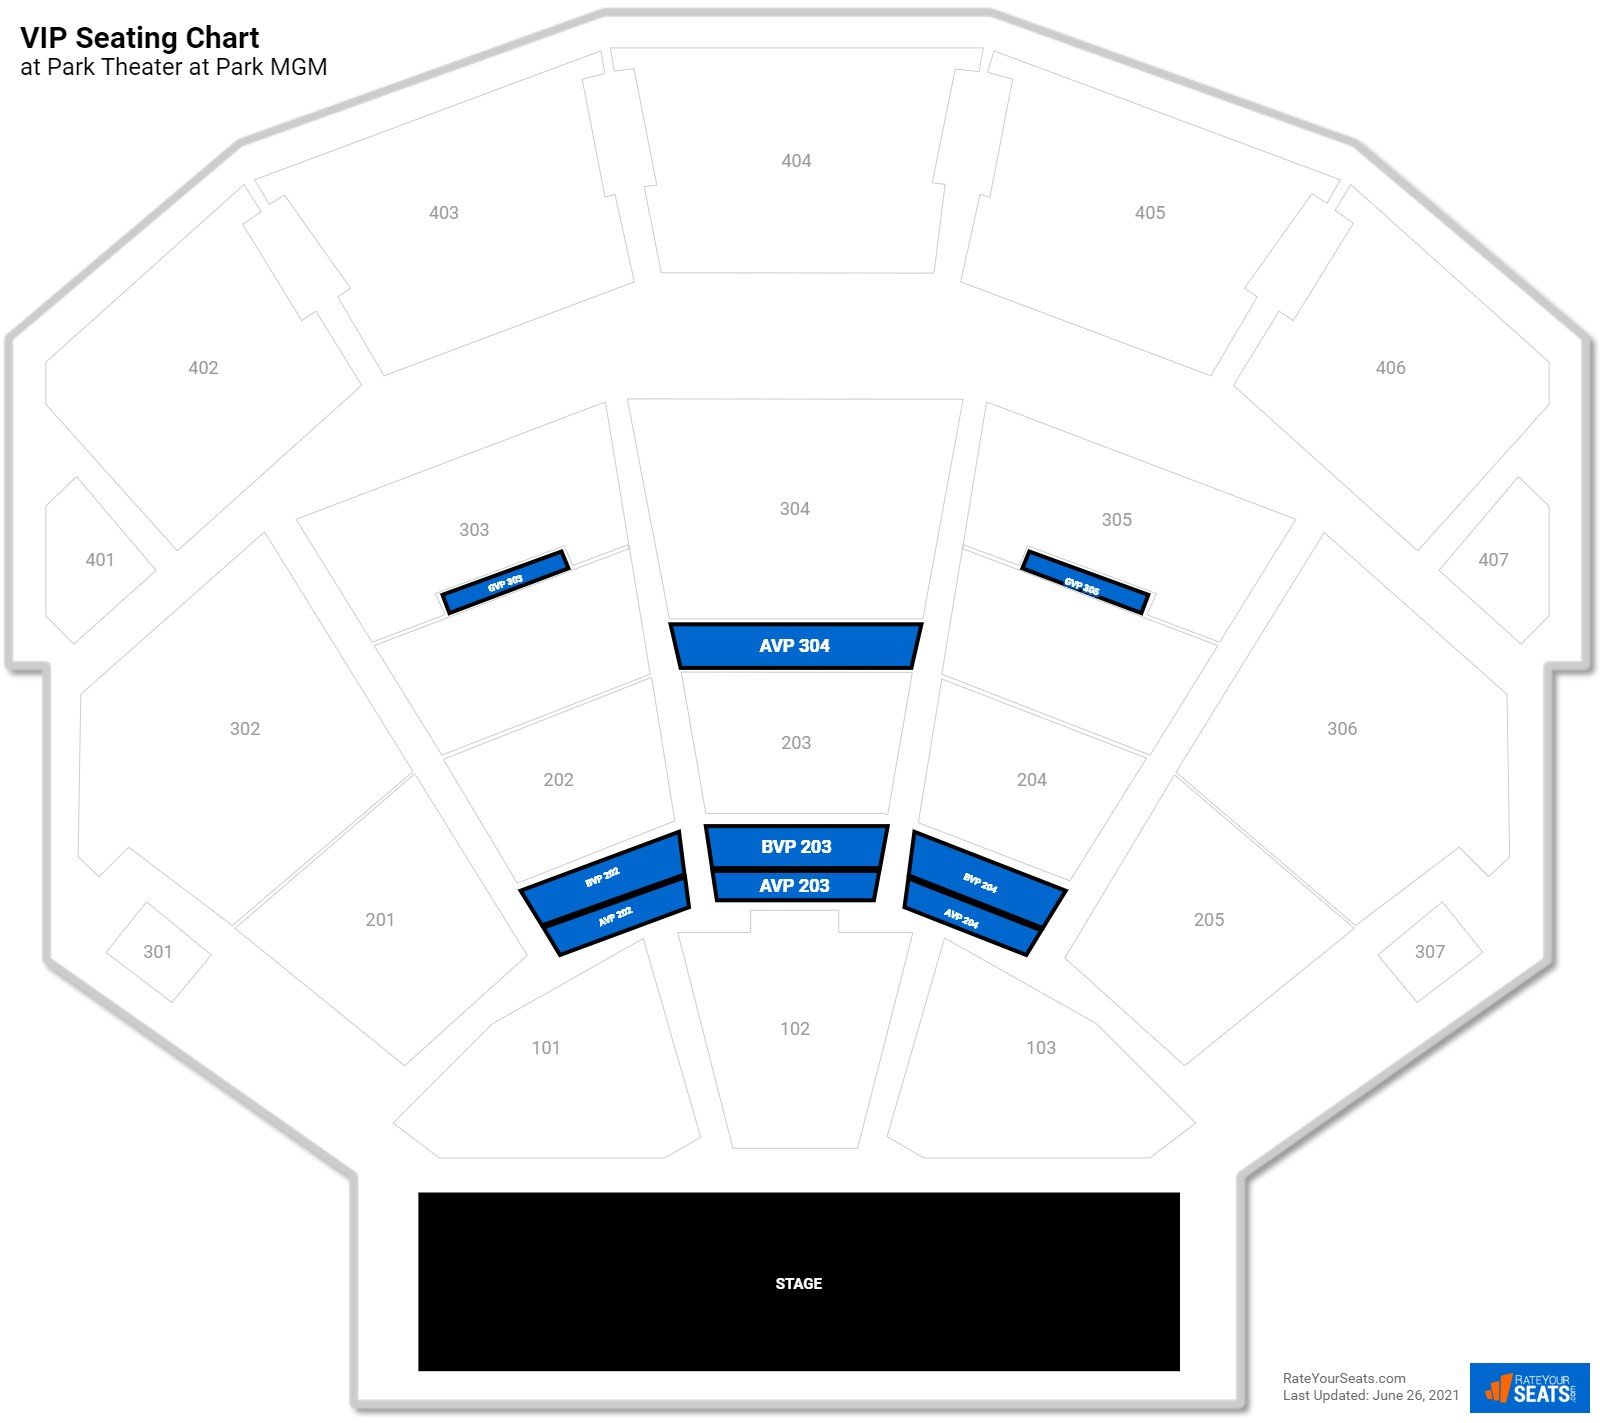 Concert VIP Seating Chart at Dolby Live at Park MGM